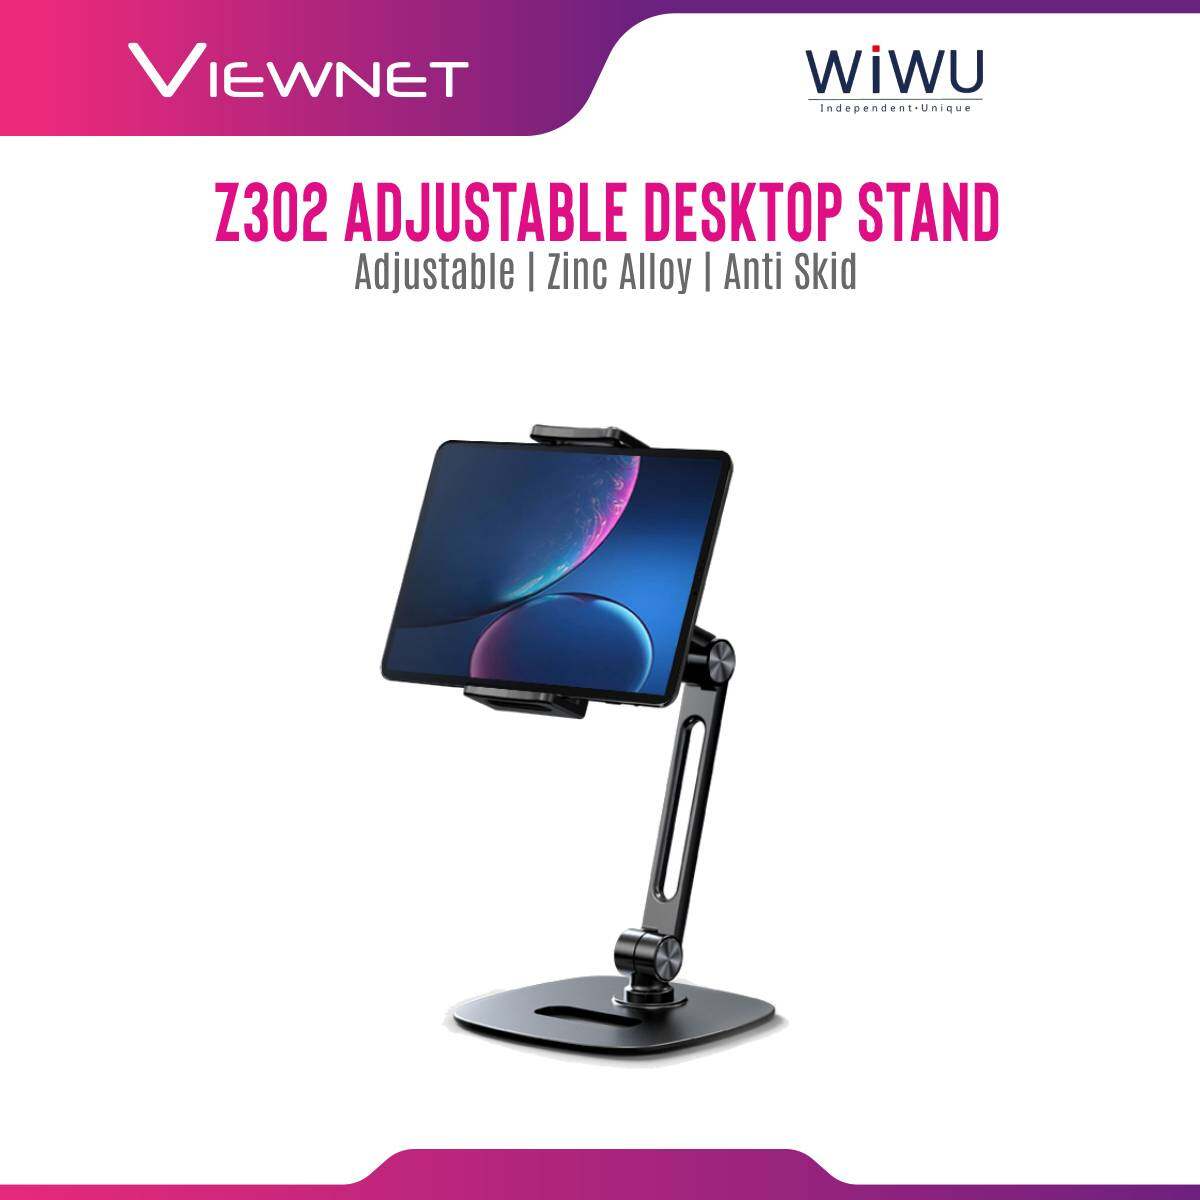 Wiwu Z302 Adjustable Desktop Stand for Tables and Phone